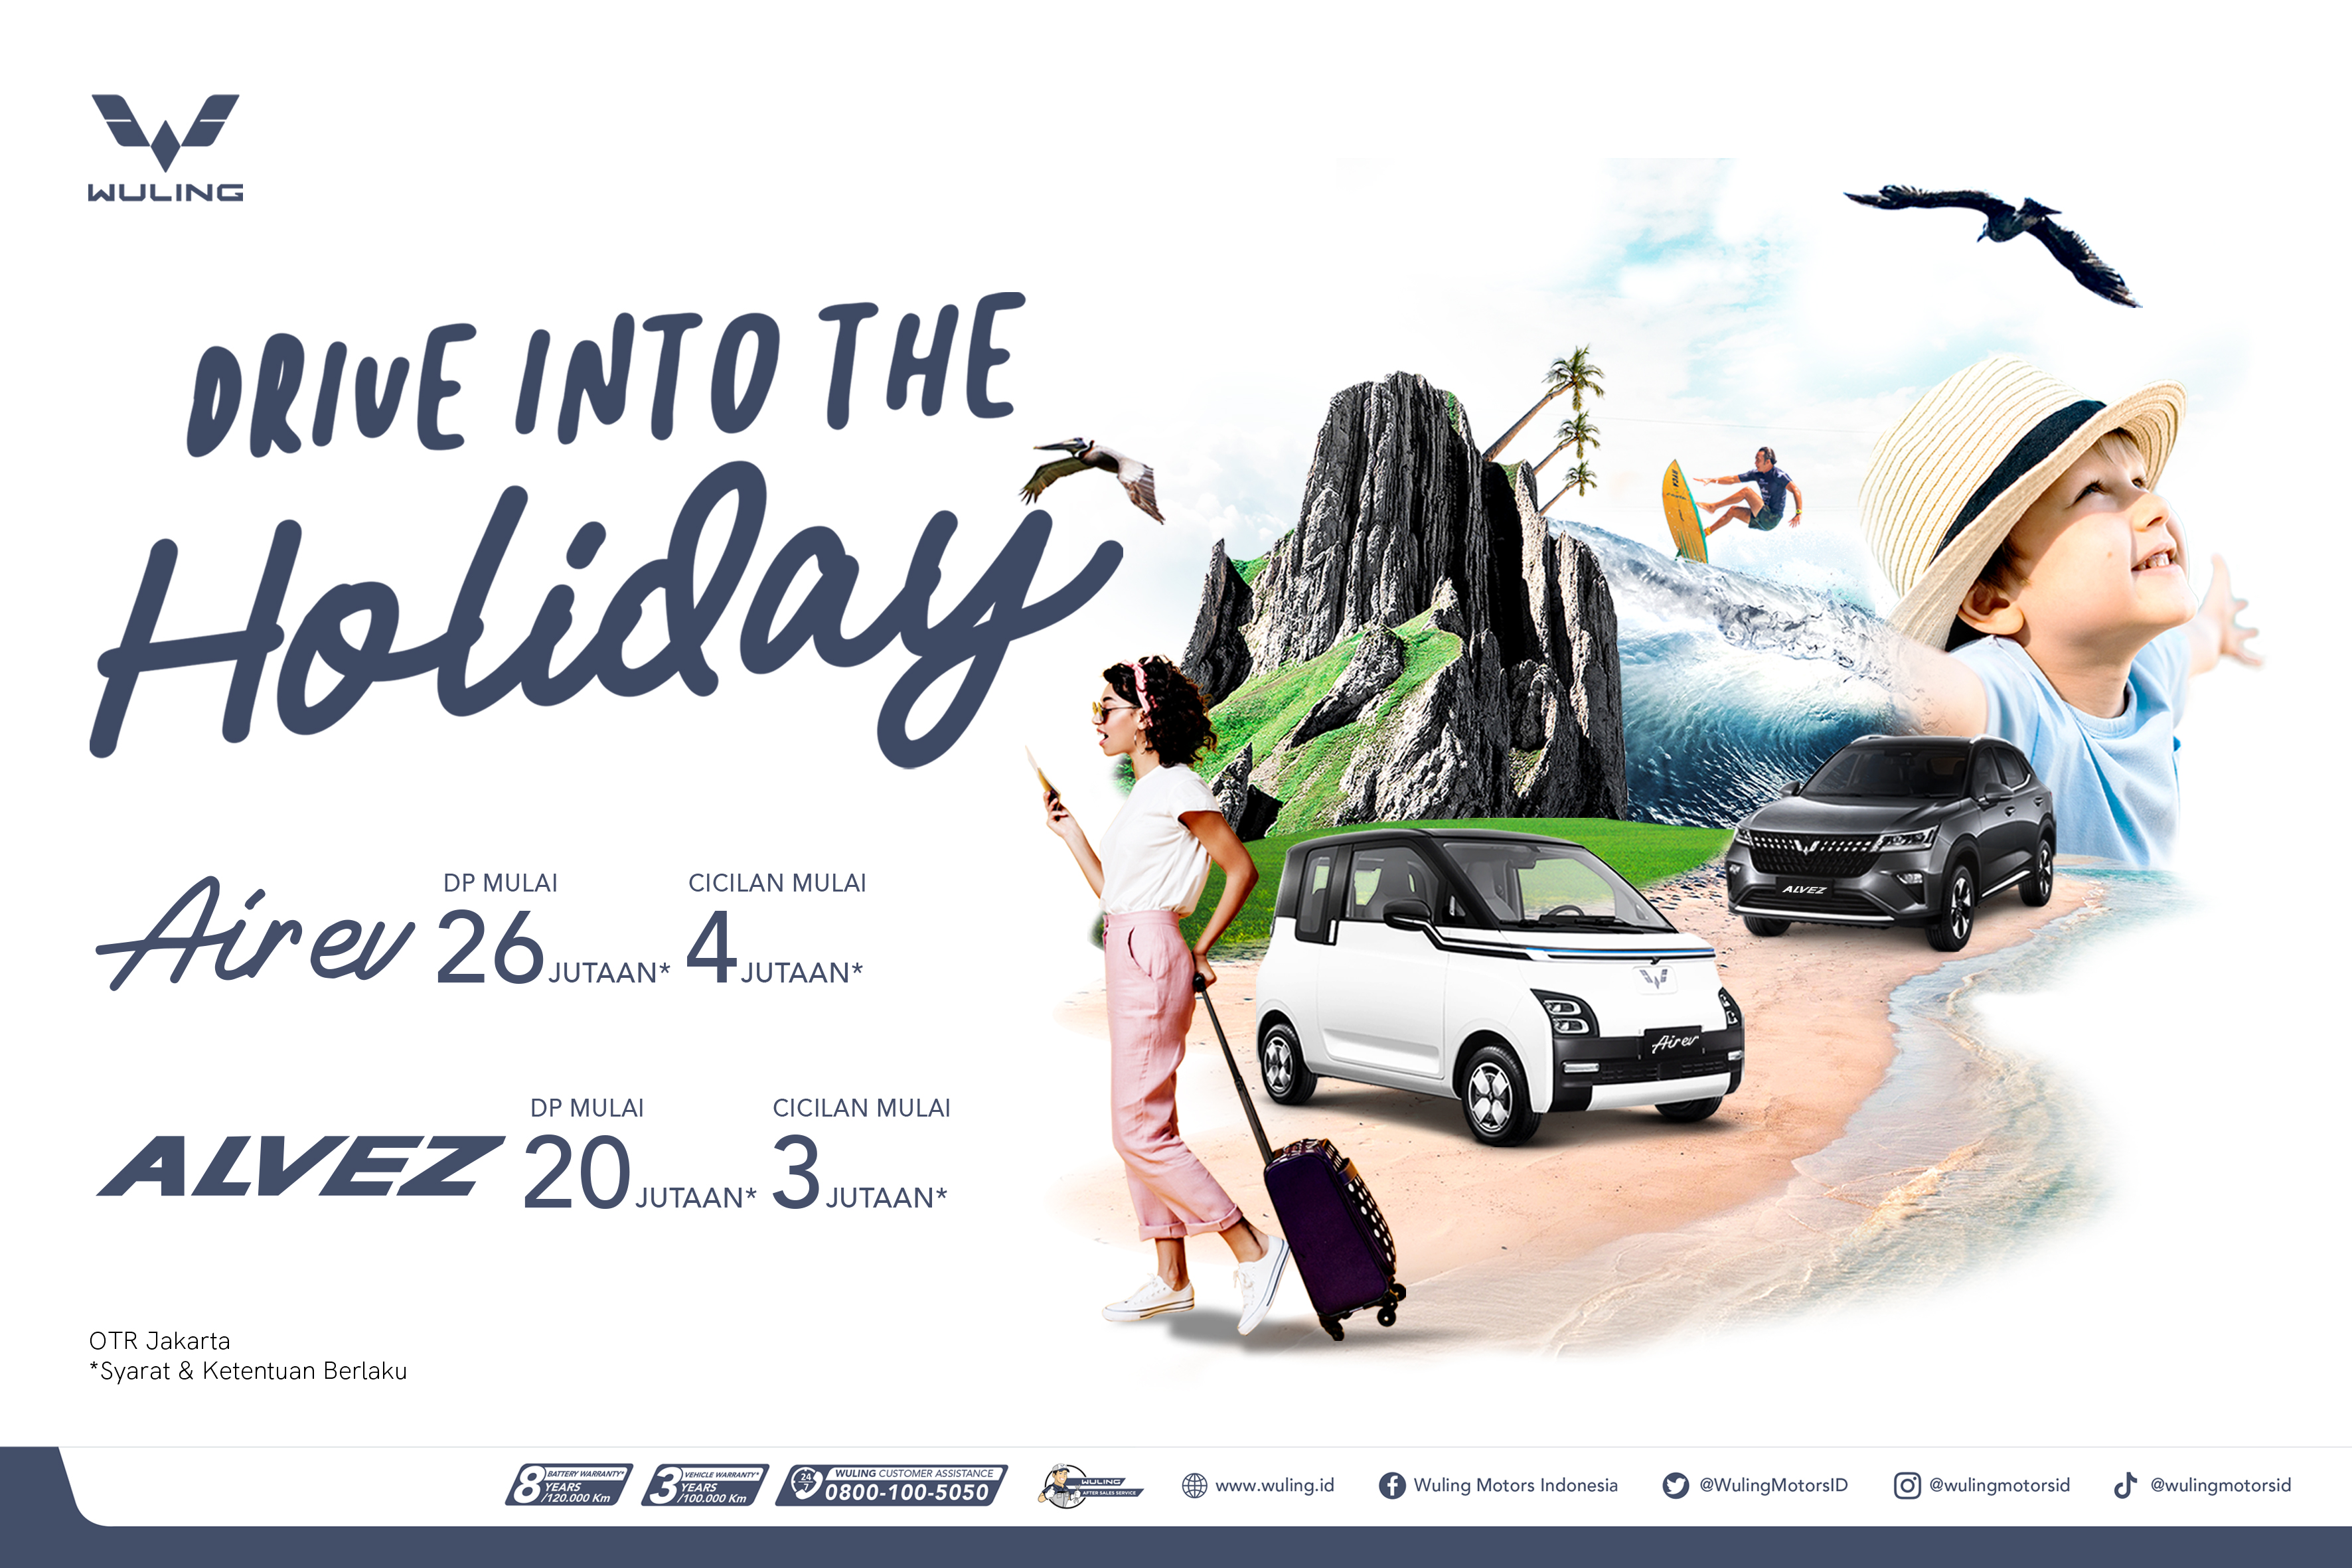 Image Wuling ‘Drive Into The Holiday’ Program is Officially Started to Welcome the School Holiday